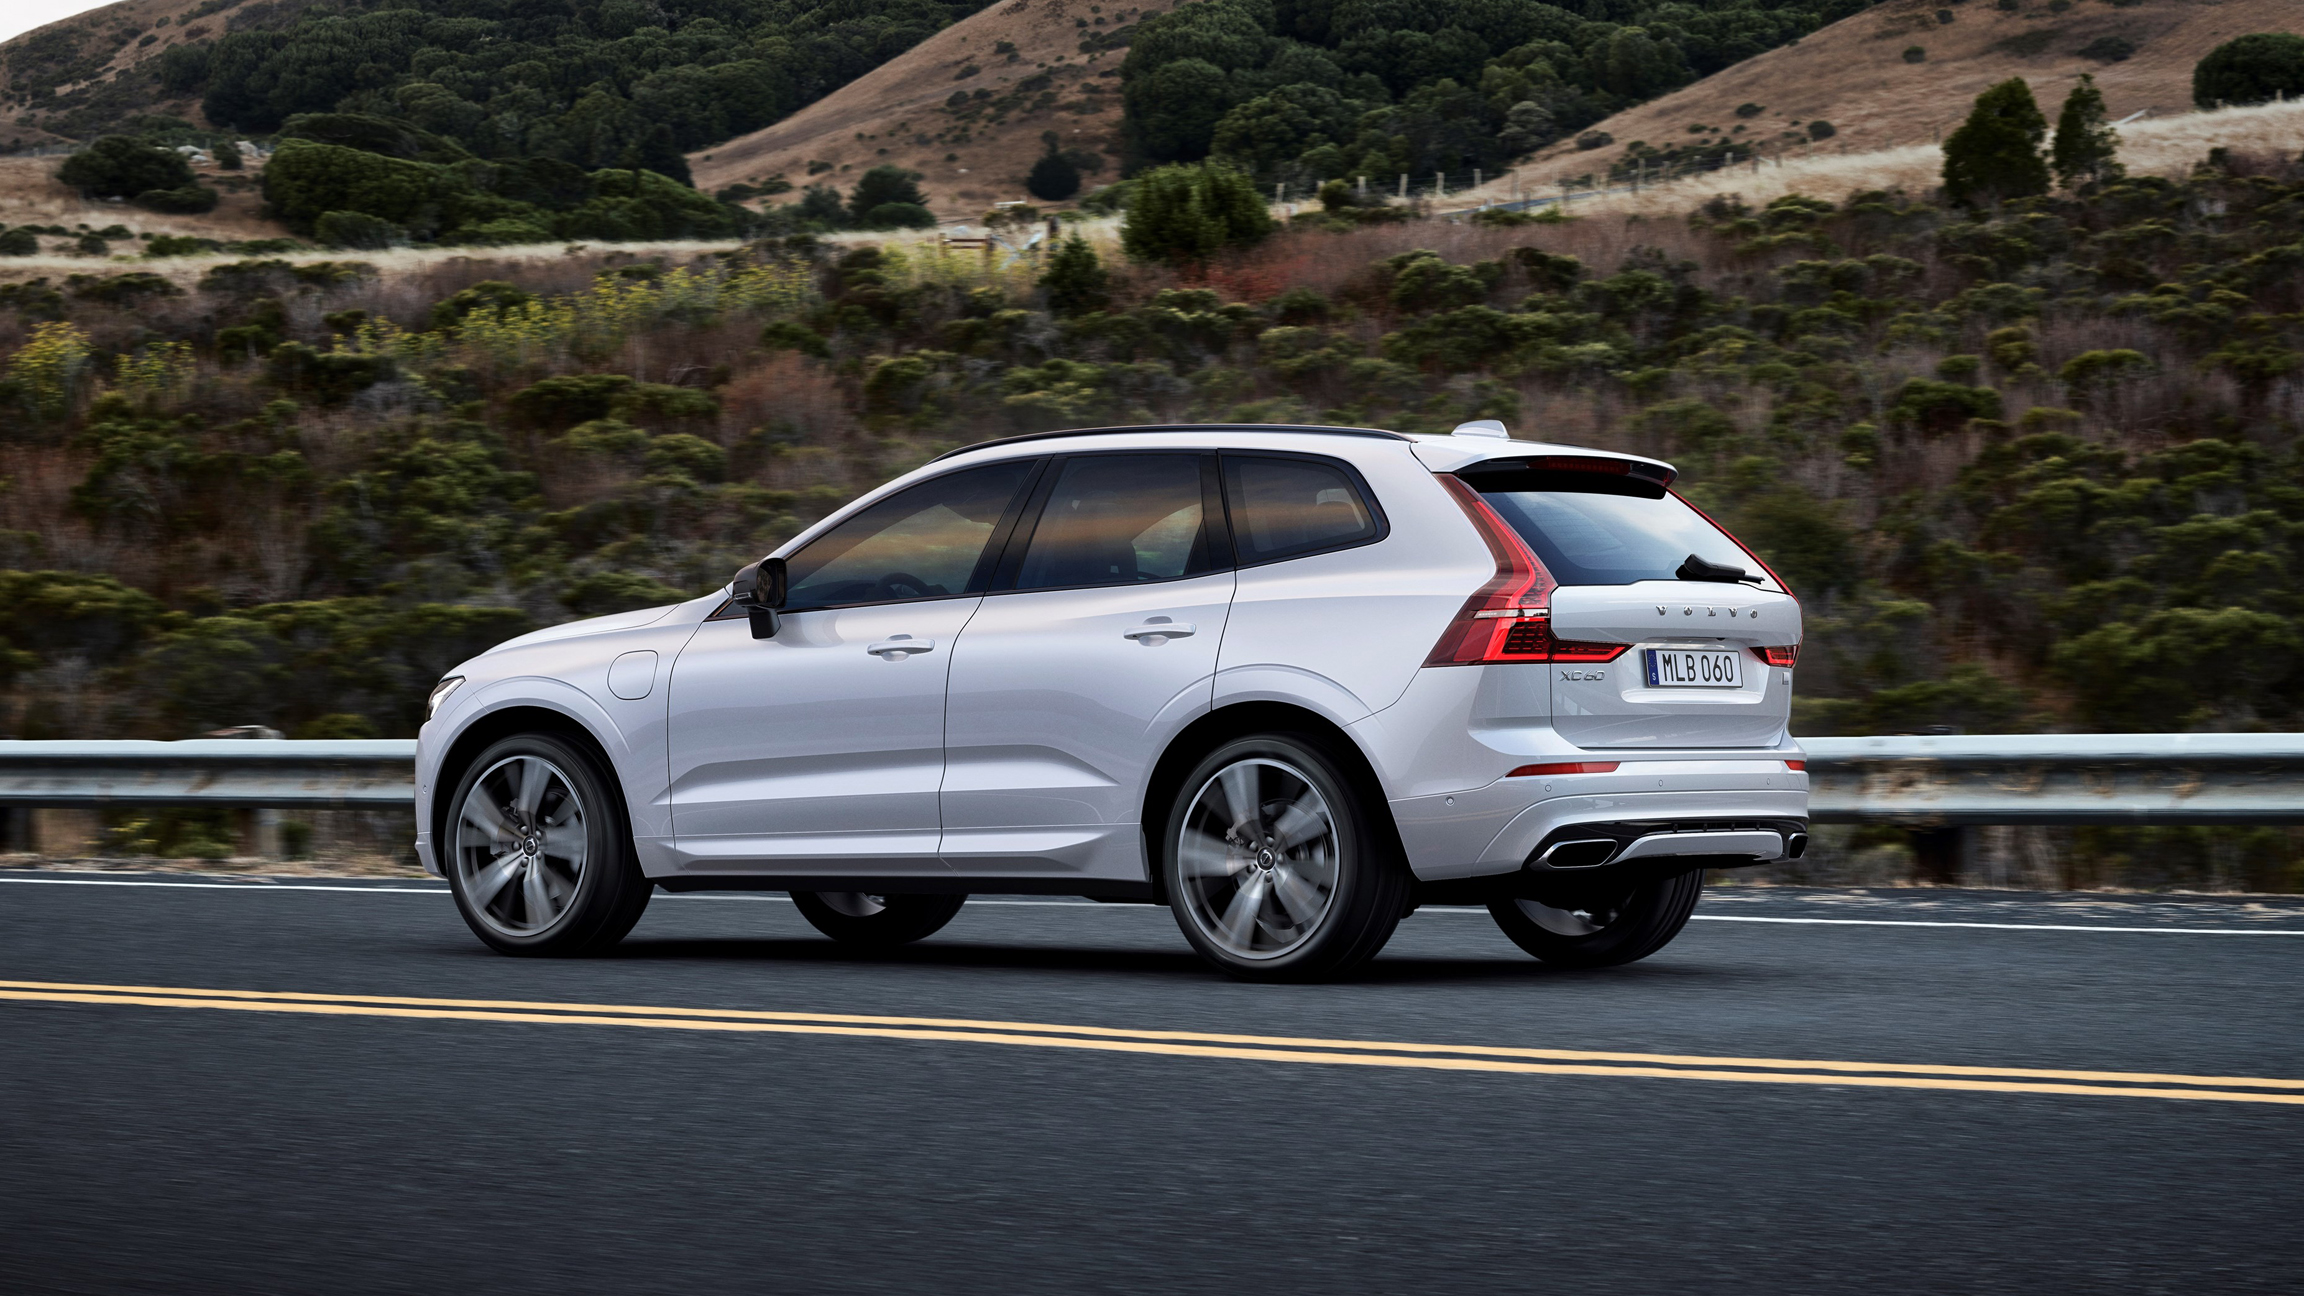 2021 Volvo XC60 Review Price, specs, features and photos Autoblog